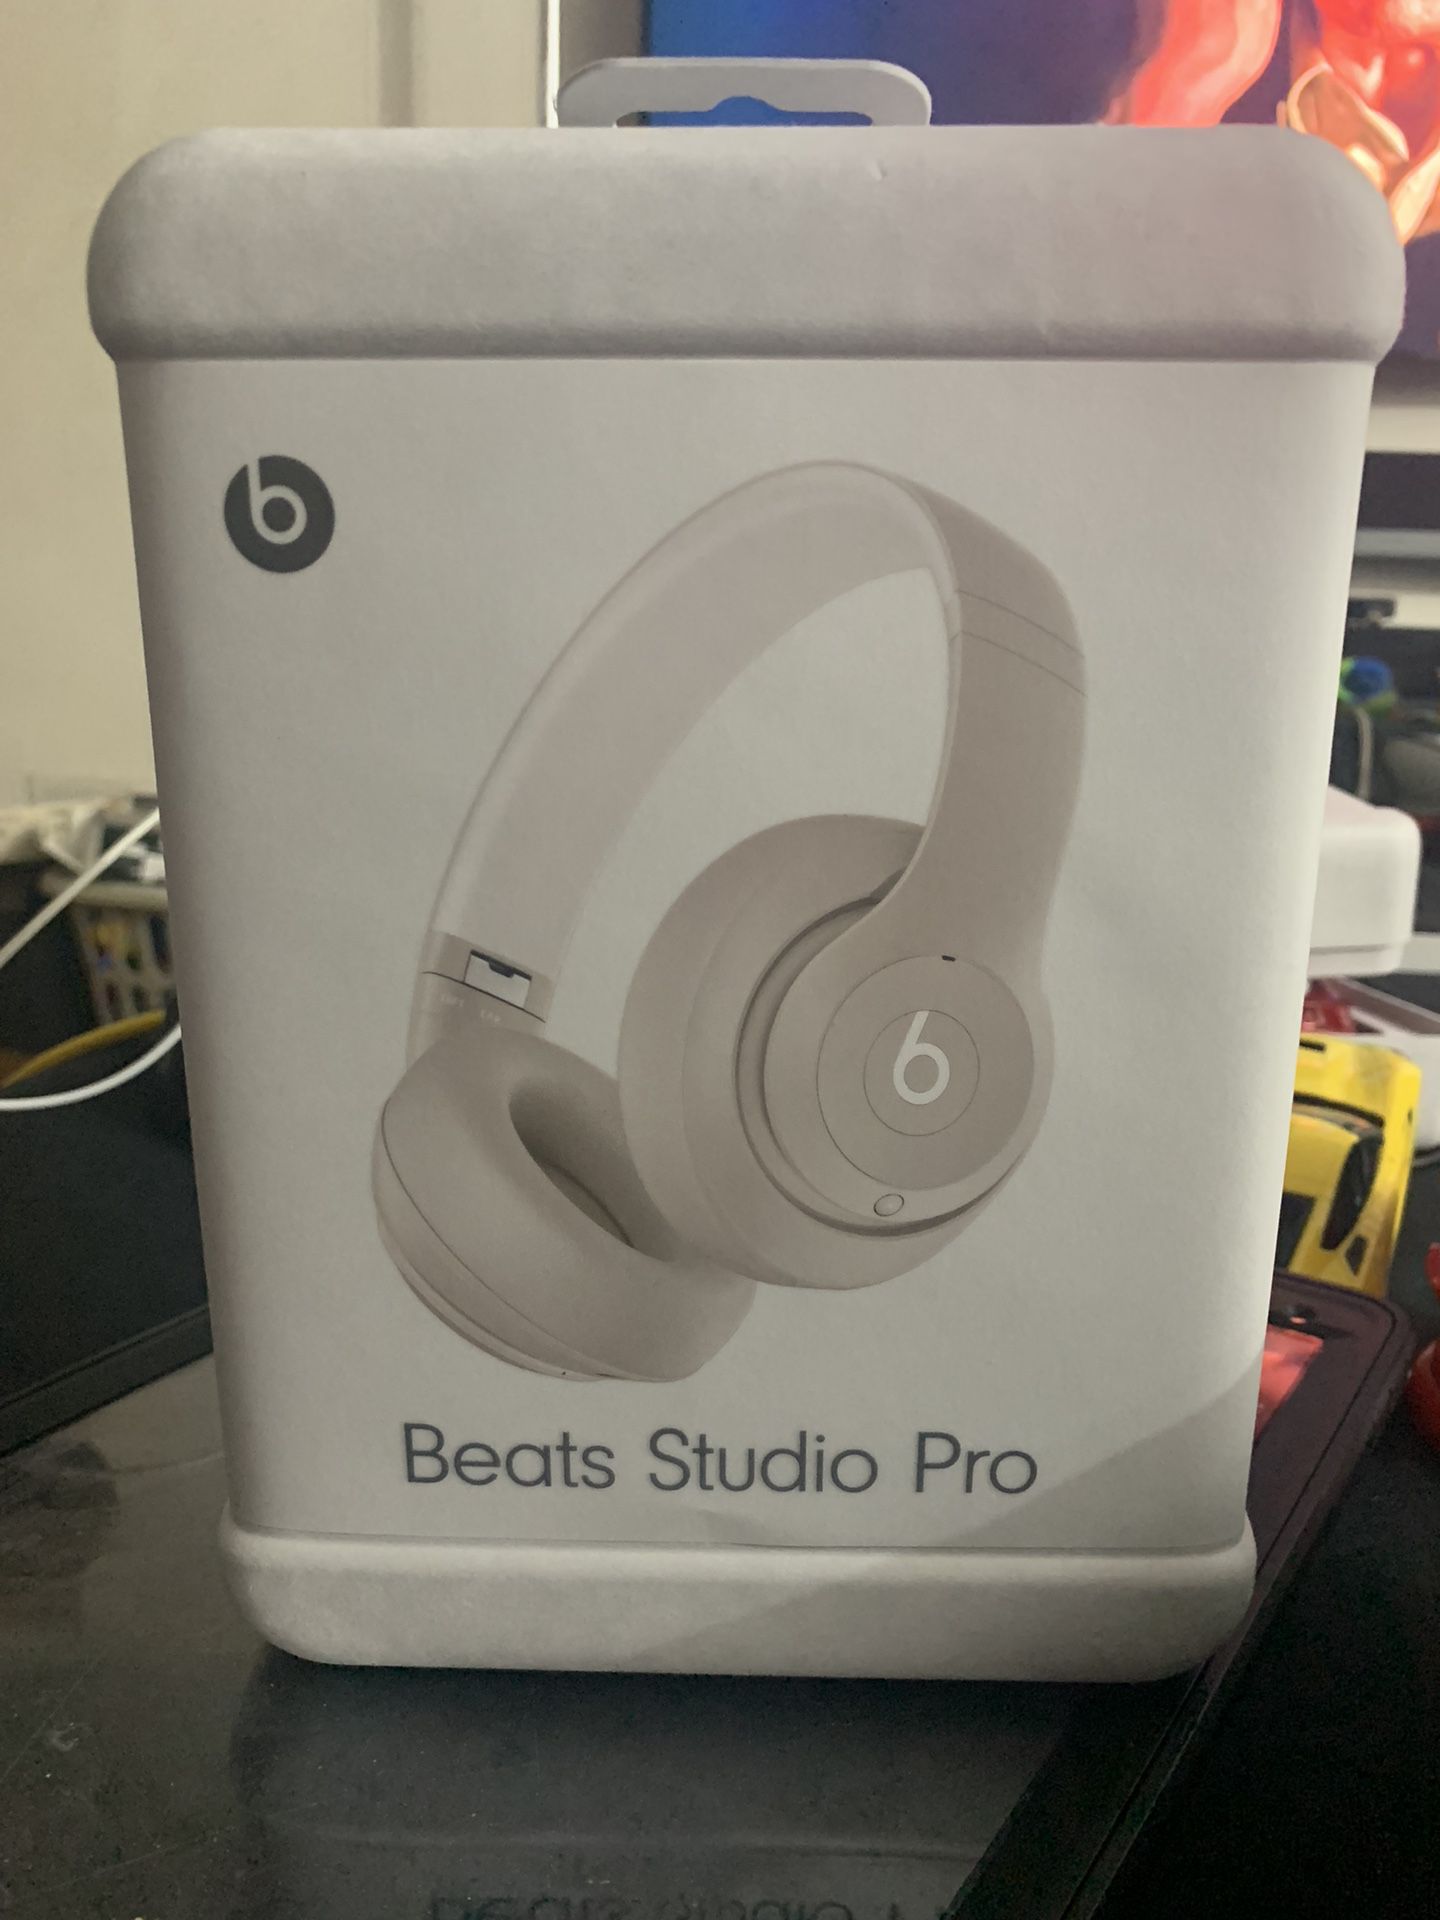 NEW!!! Beats by Dr. Dre Studio Pro Over-the-Ear Wireless Headphones - Sandstone with APPLE CARE!!